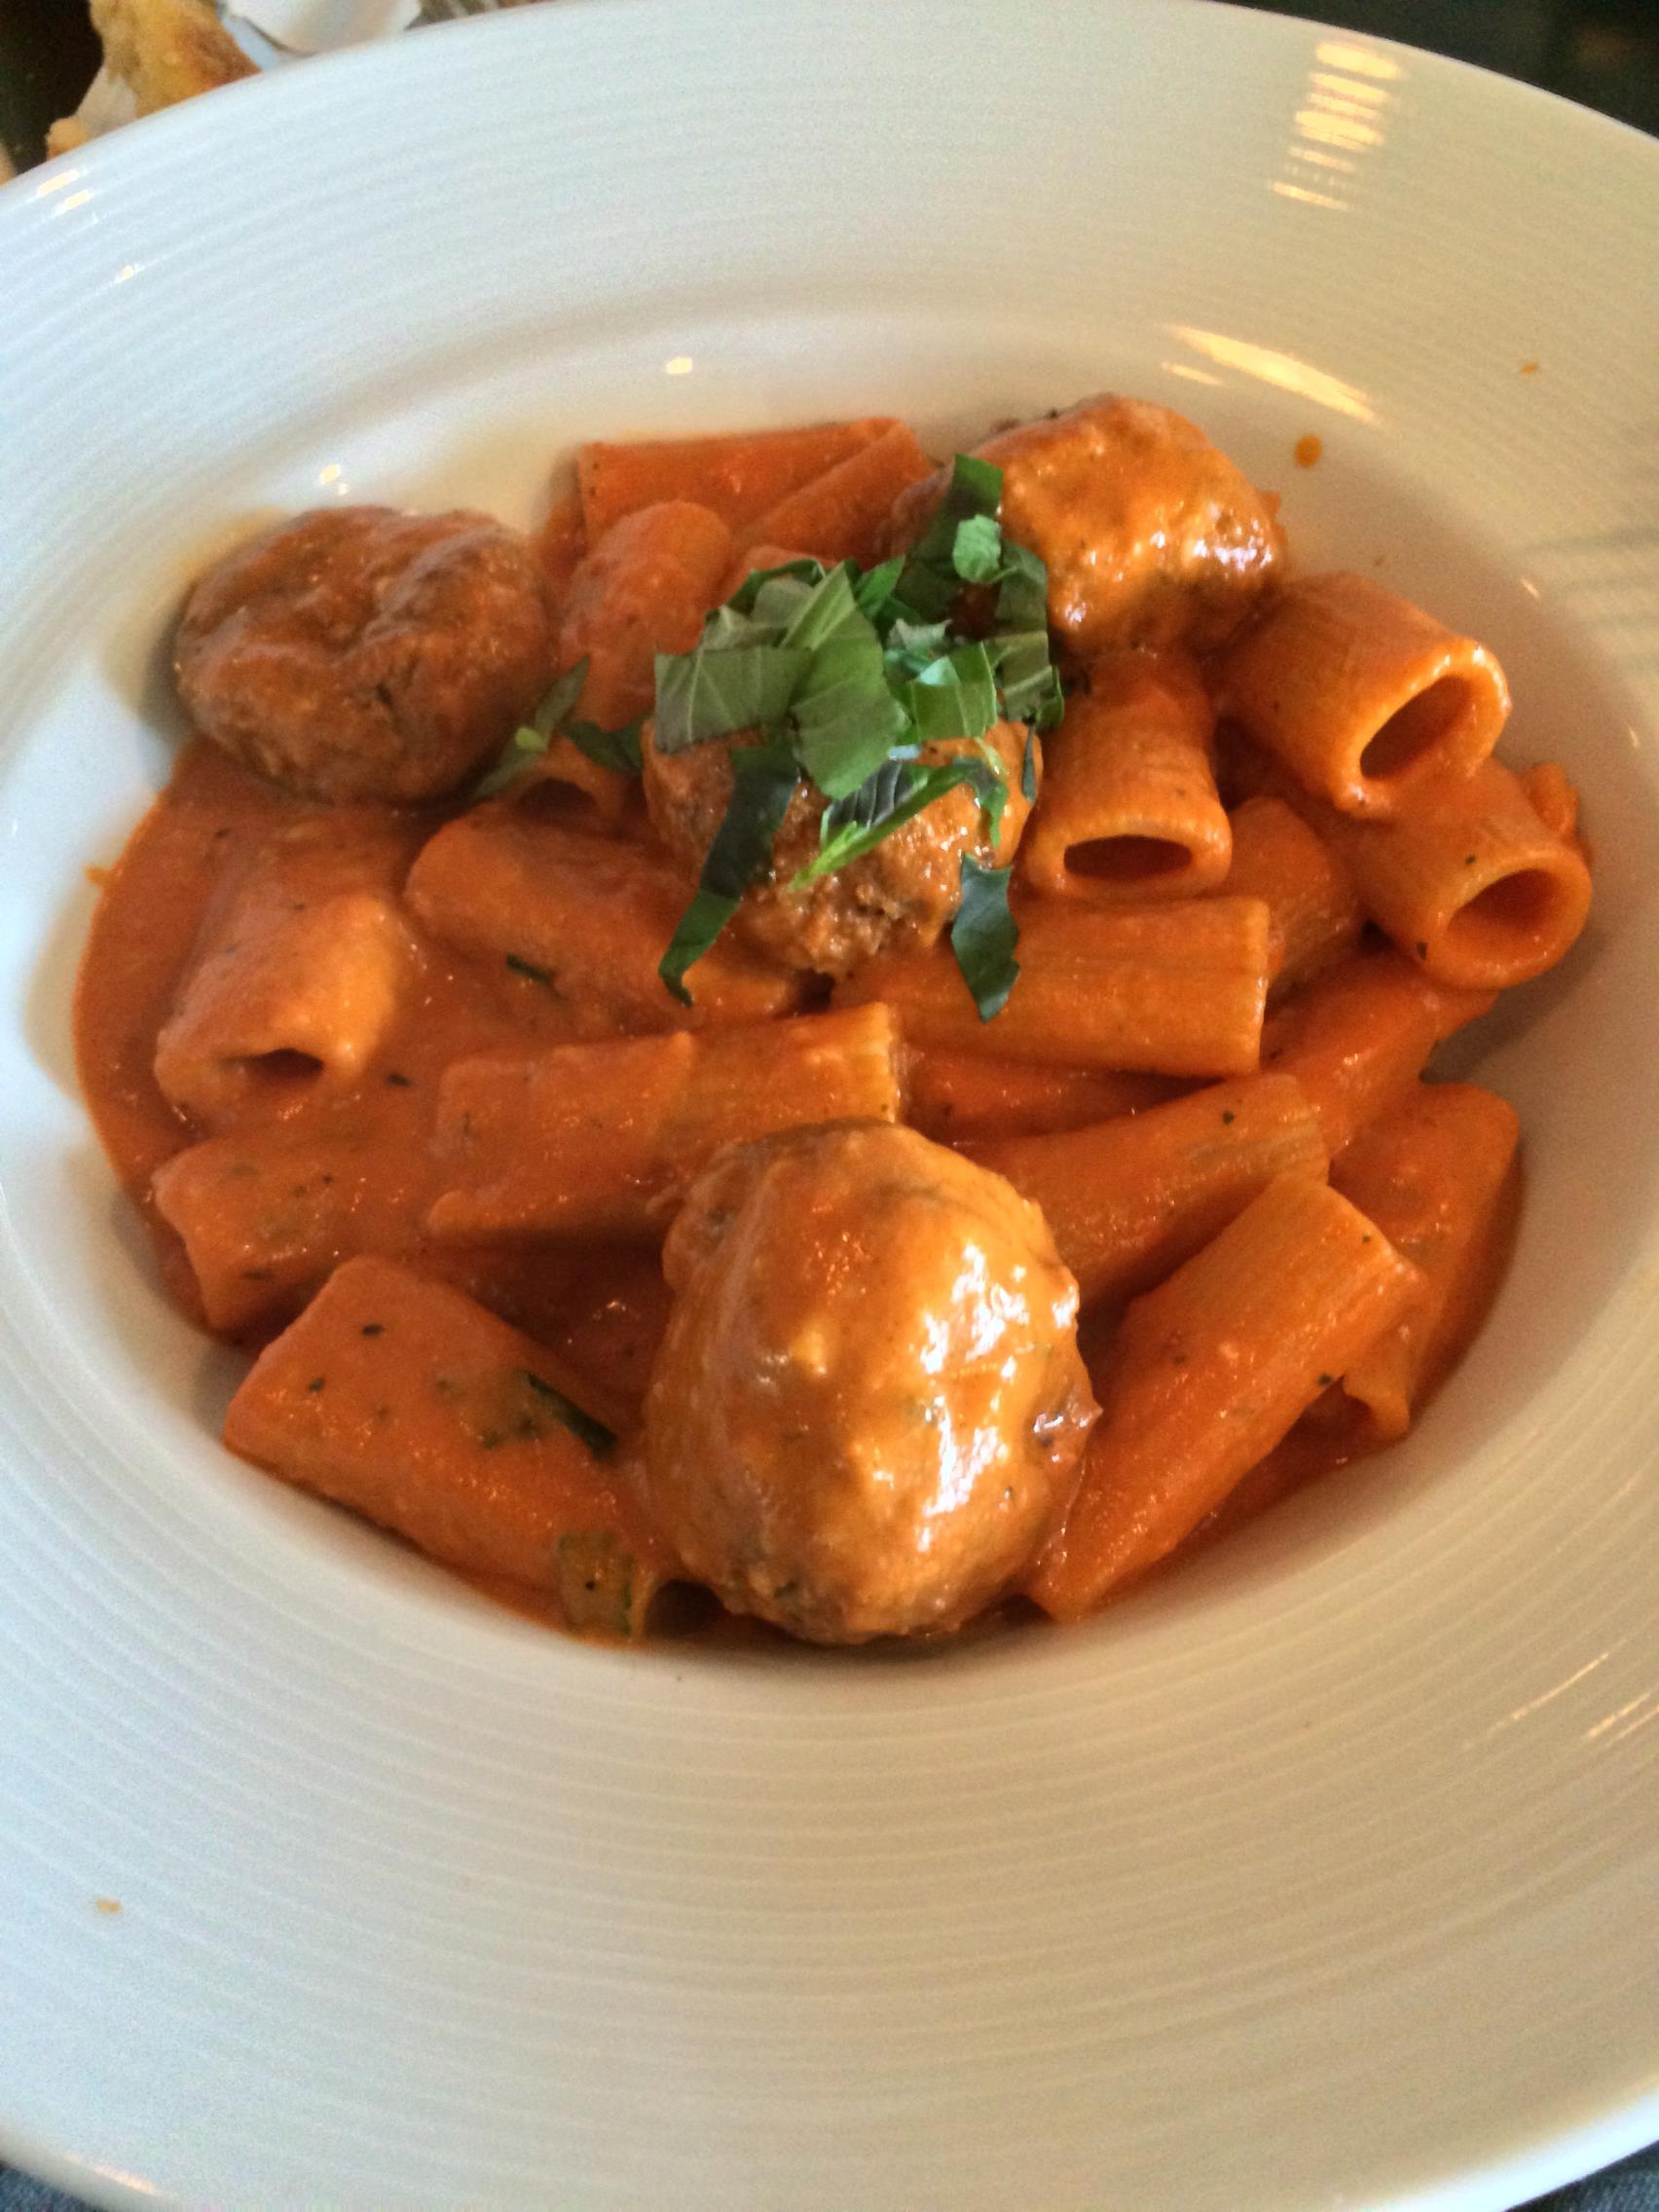 Spaghetti and meatball with vodka sauce at Momma's Kitchen